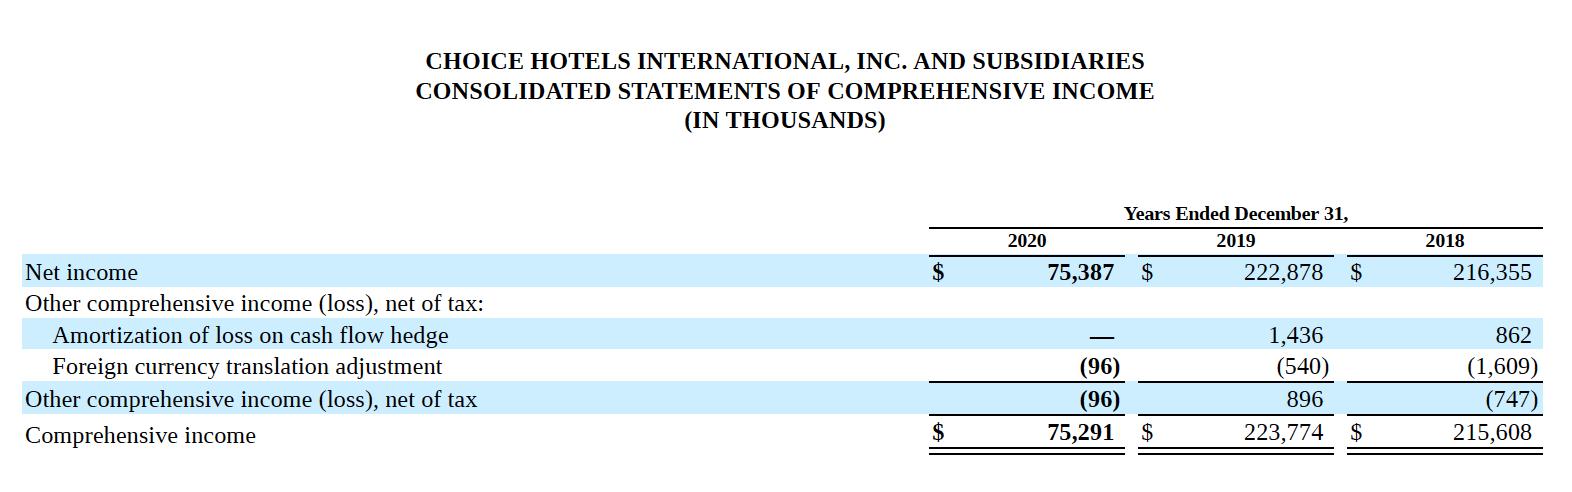 CHOICE HOTELS INTERNATIONAL, INC. AND SUBSIDIARIES CONSOLIDATED STATEMENTS OF COMPREHENSIVE INCOME (IN THOUSANDS) Years Ended